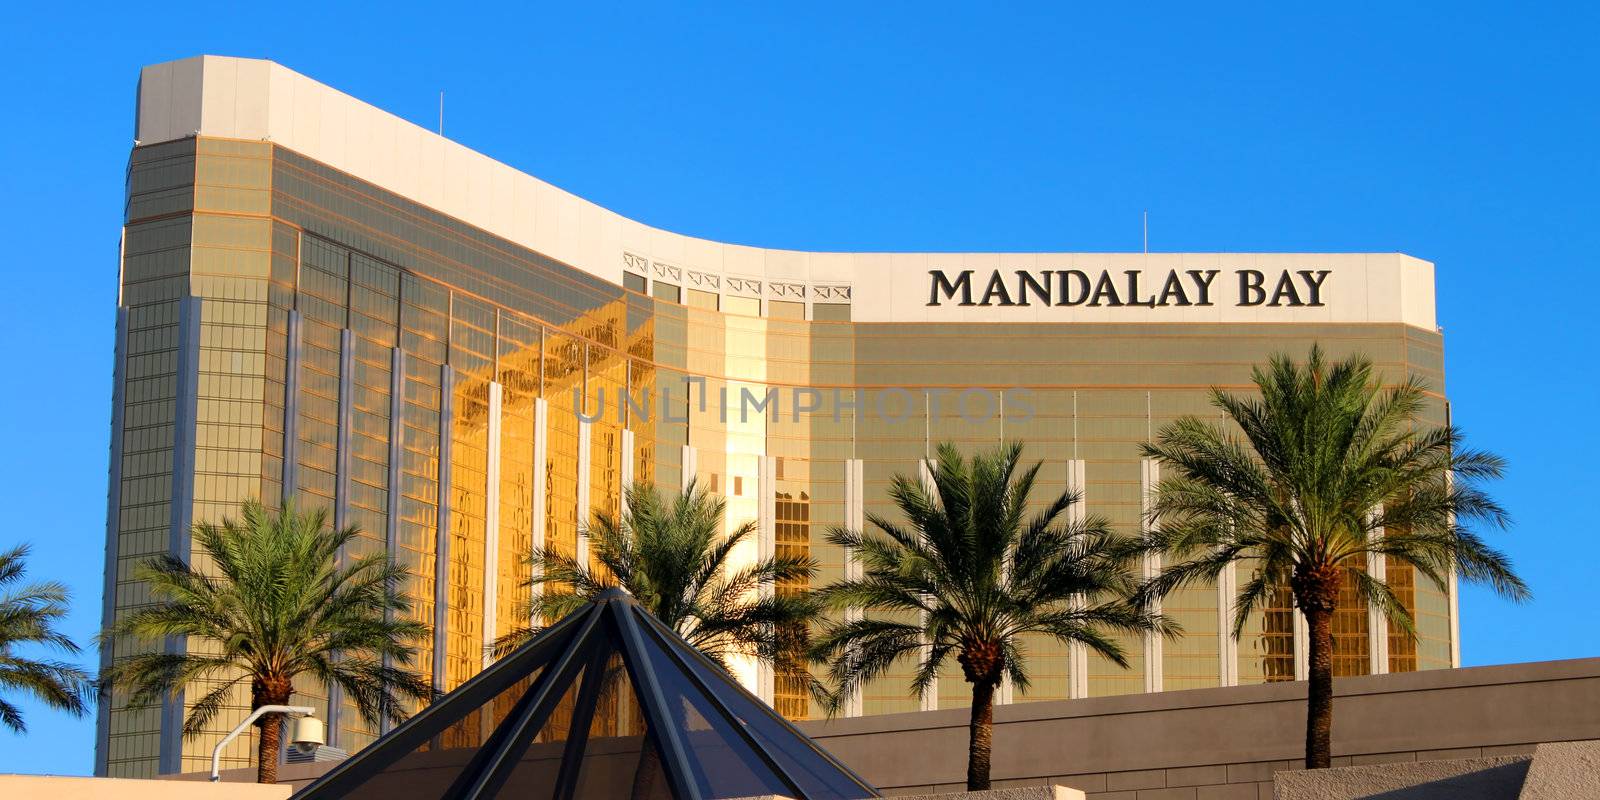 Las Vegas, USA - August 19, 2009: The Mandalay Bay Resort and Casino opened in 1999 in Las Vegas, Nevada.  Seen here is the reflective gold colored exterior of the 44-story tall main building.